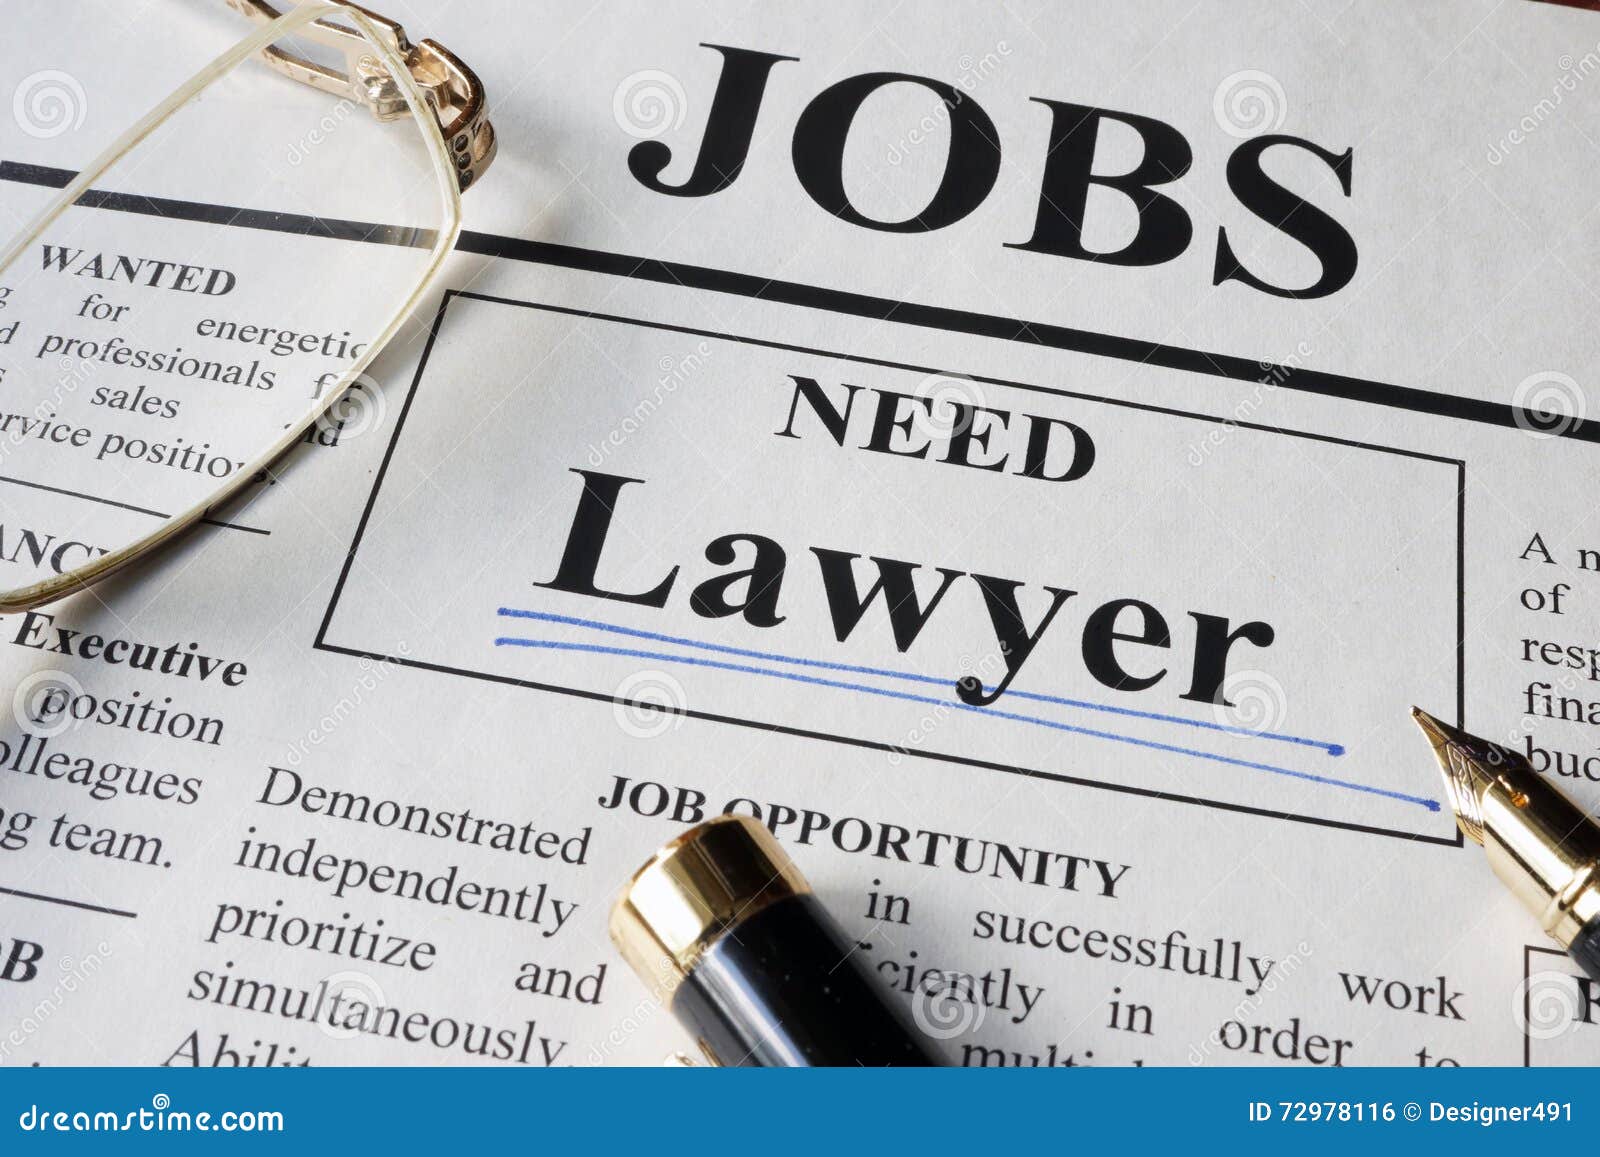 900 Vacancy Lawyer Photos Free Royalty Free Stock Photos From Dreamstime